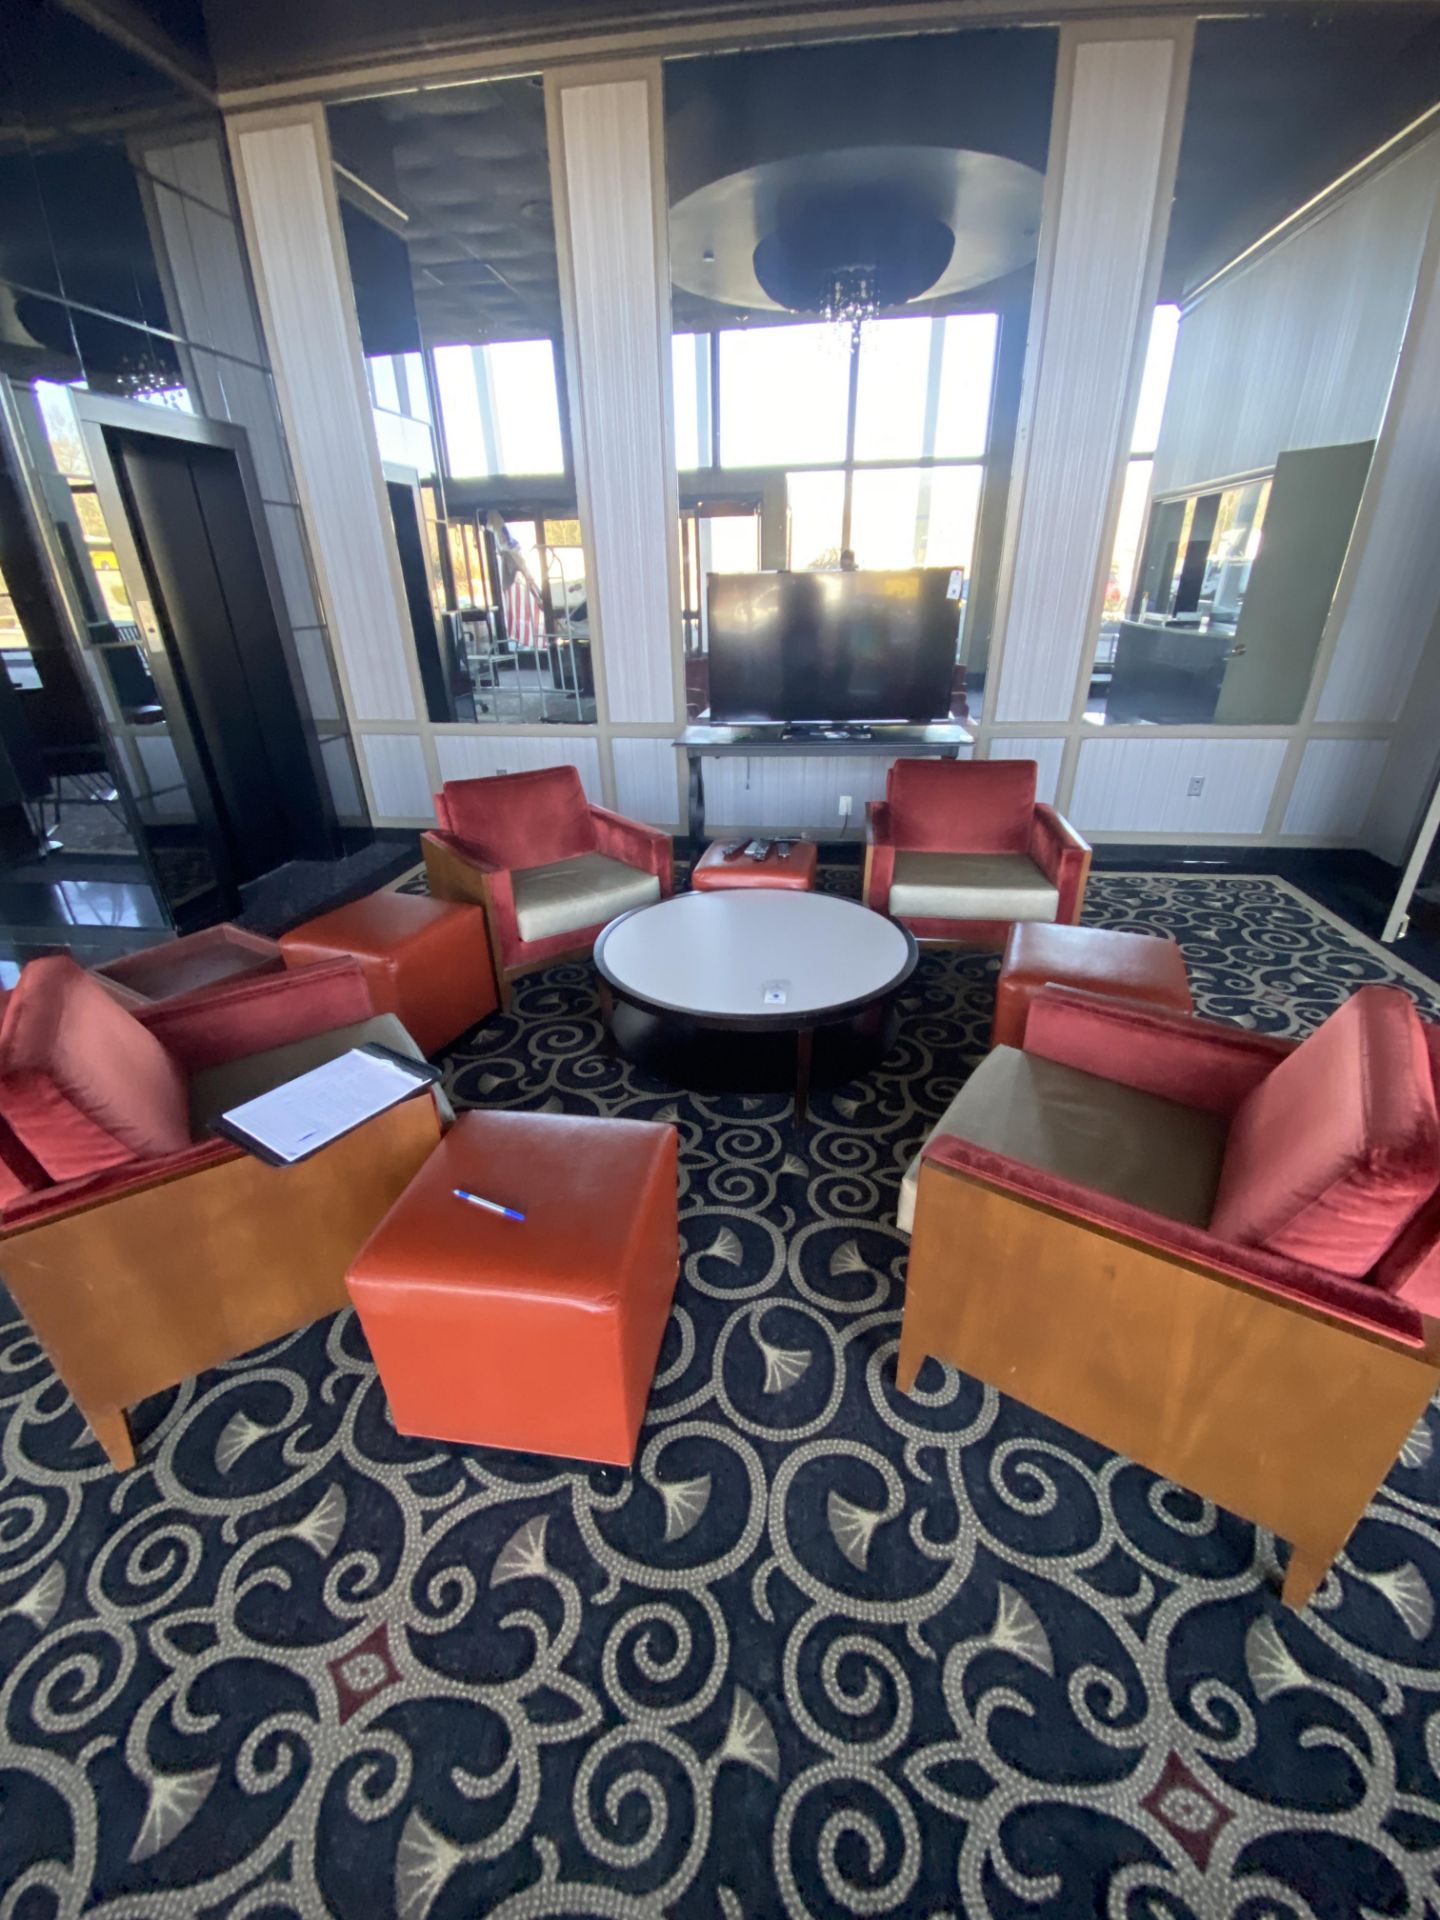 {LOT} Lobby Furniture Setup c/o: 4 Arm chairs 4 ottomans, Approx 4' Round Coffee Table